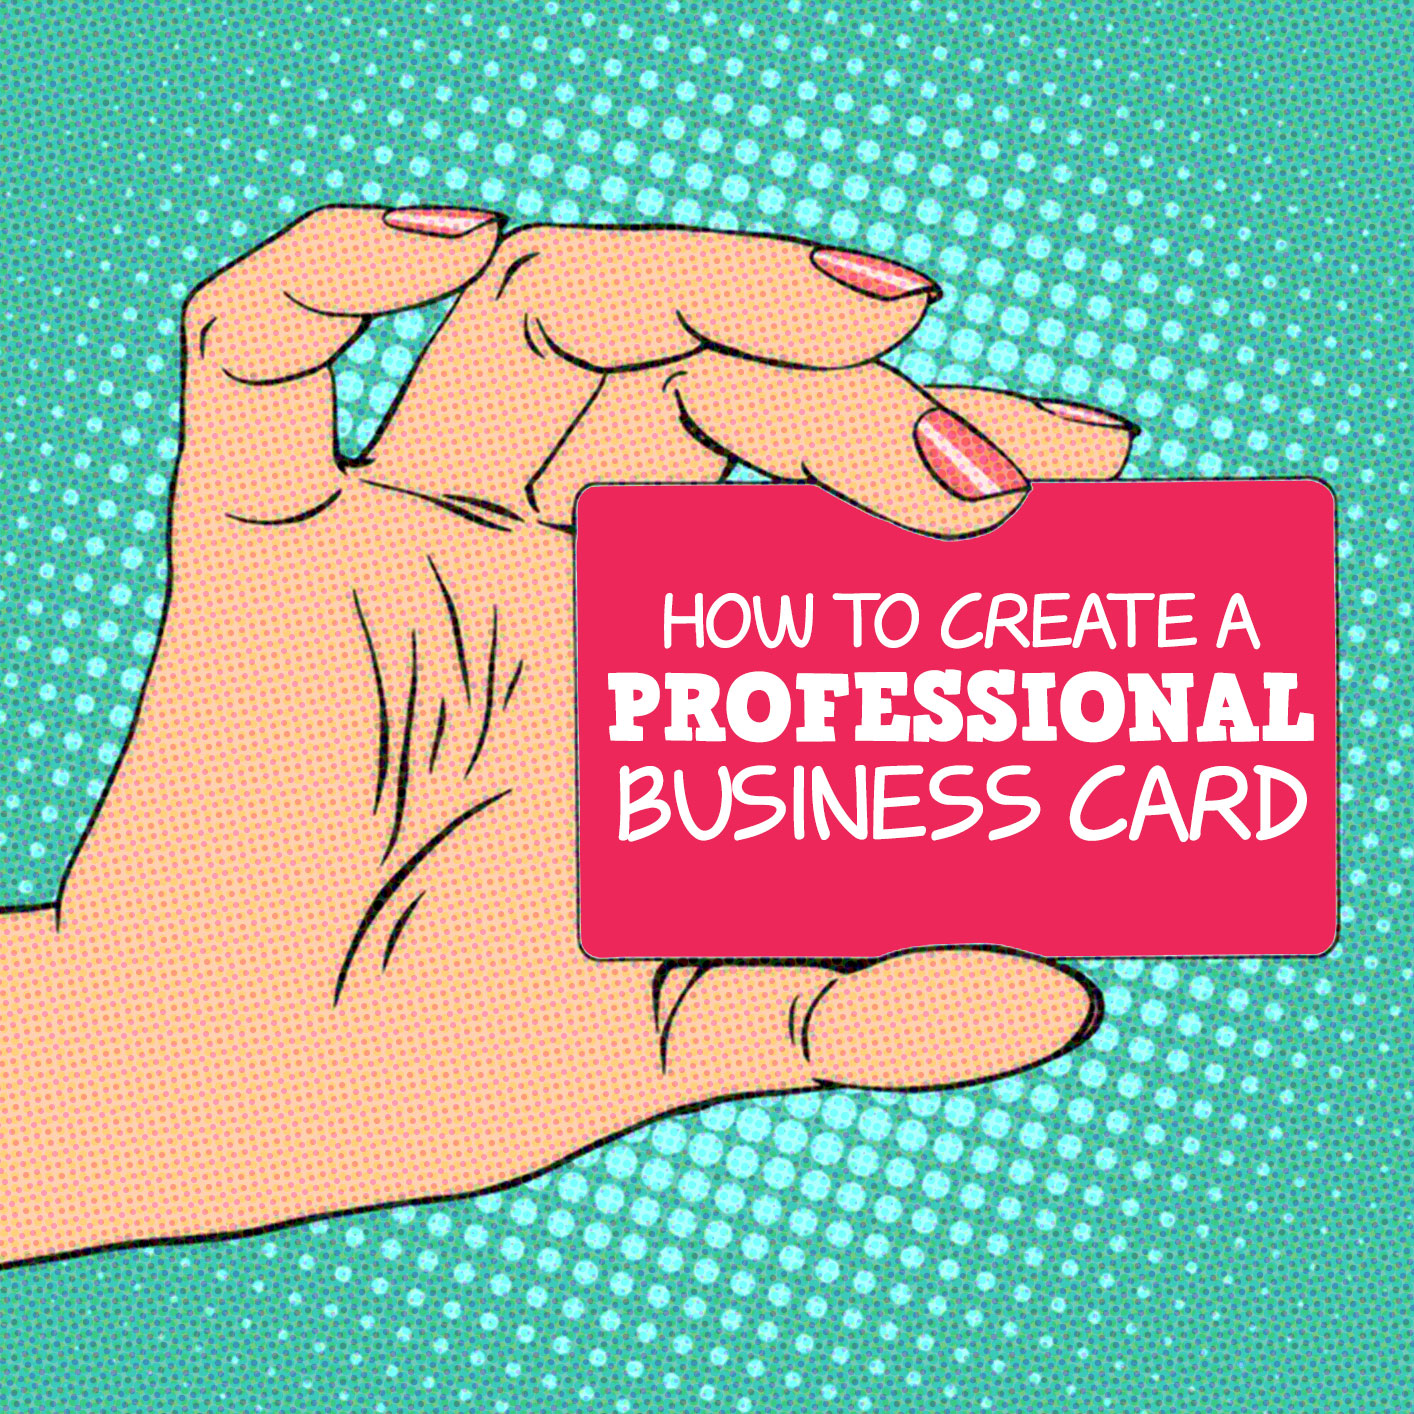 How to Create A Professional Business Card: Information, Design & Memorability